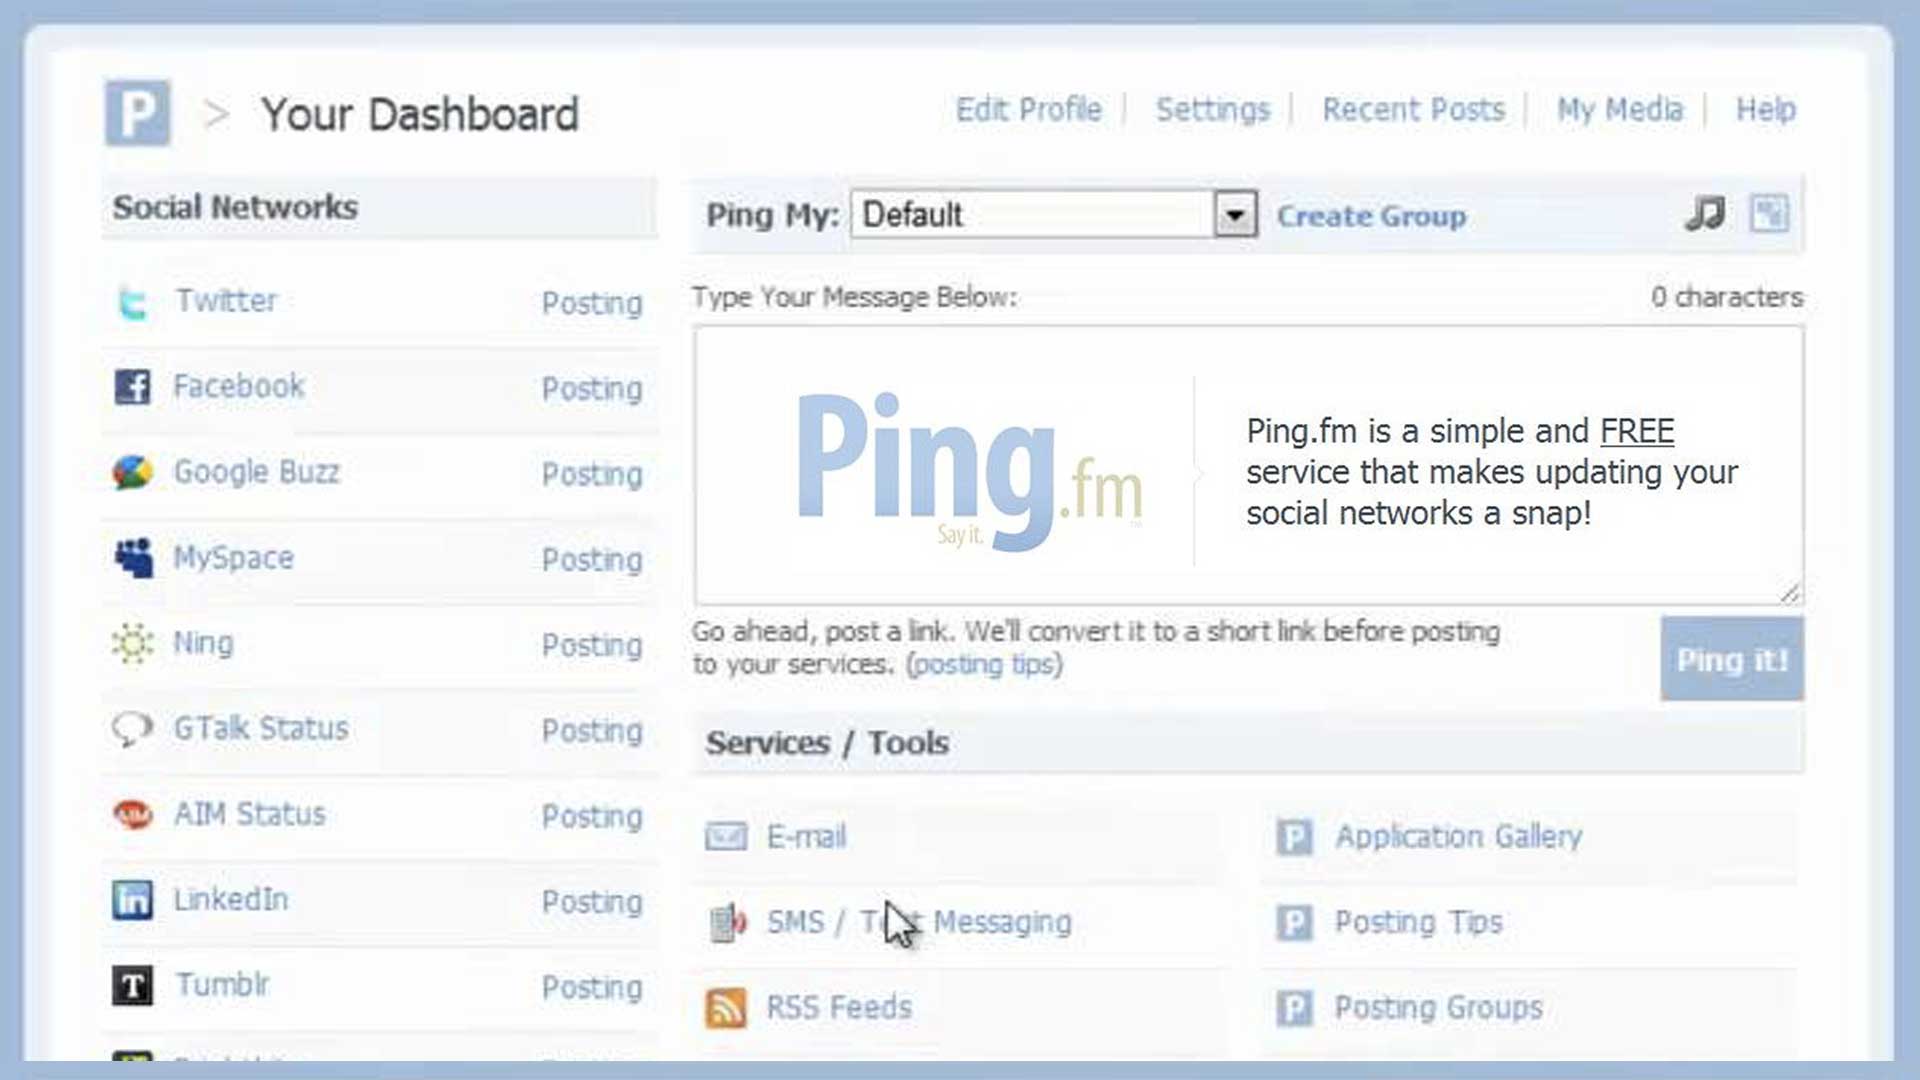 Ping.fm goes down. But for how long?